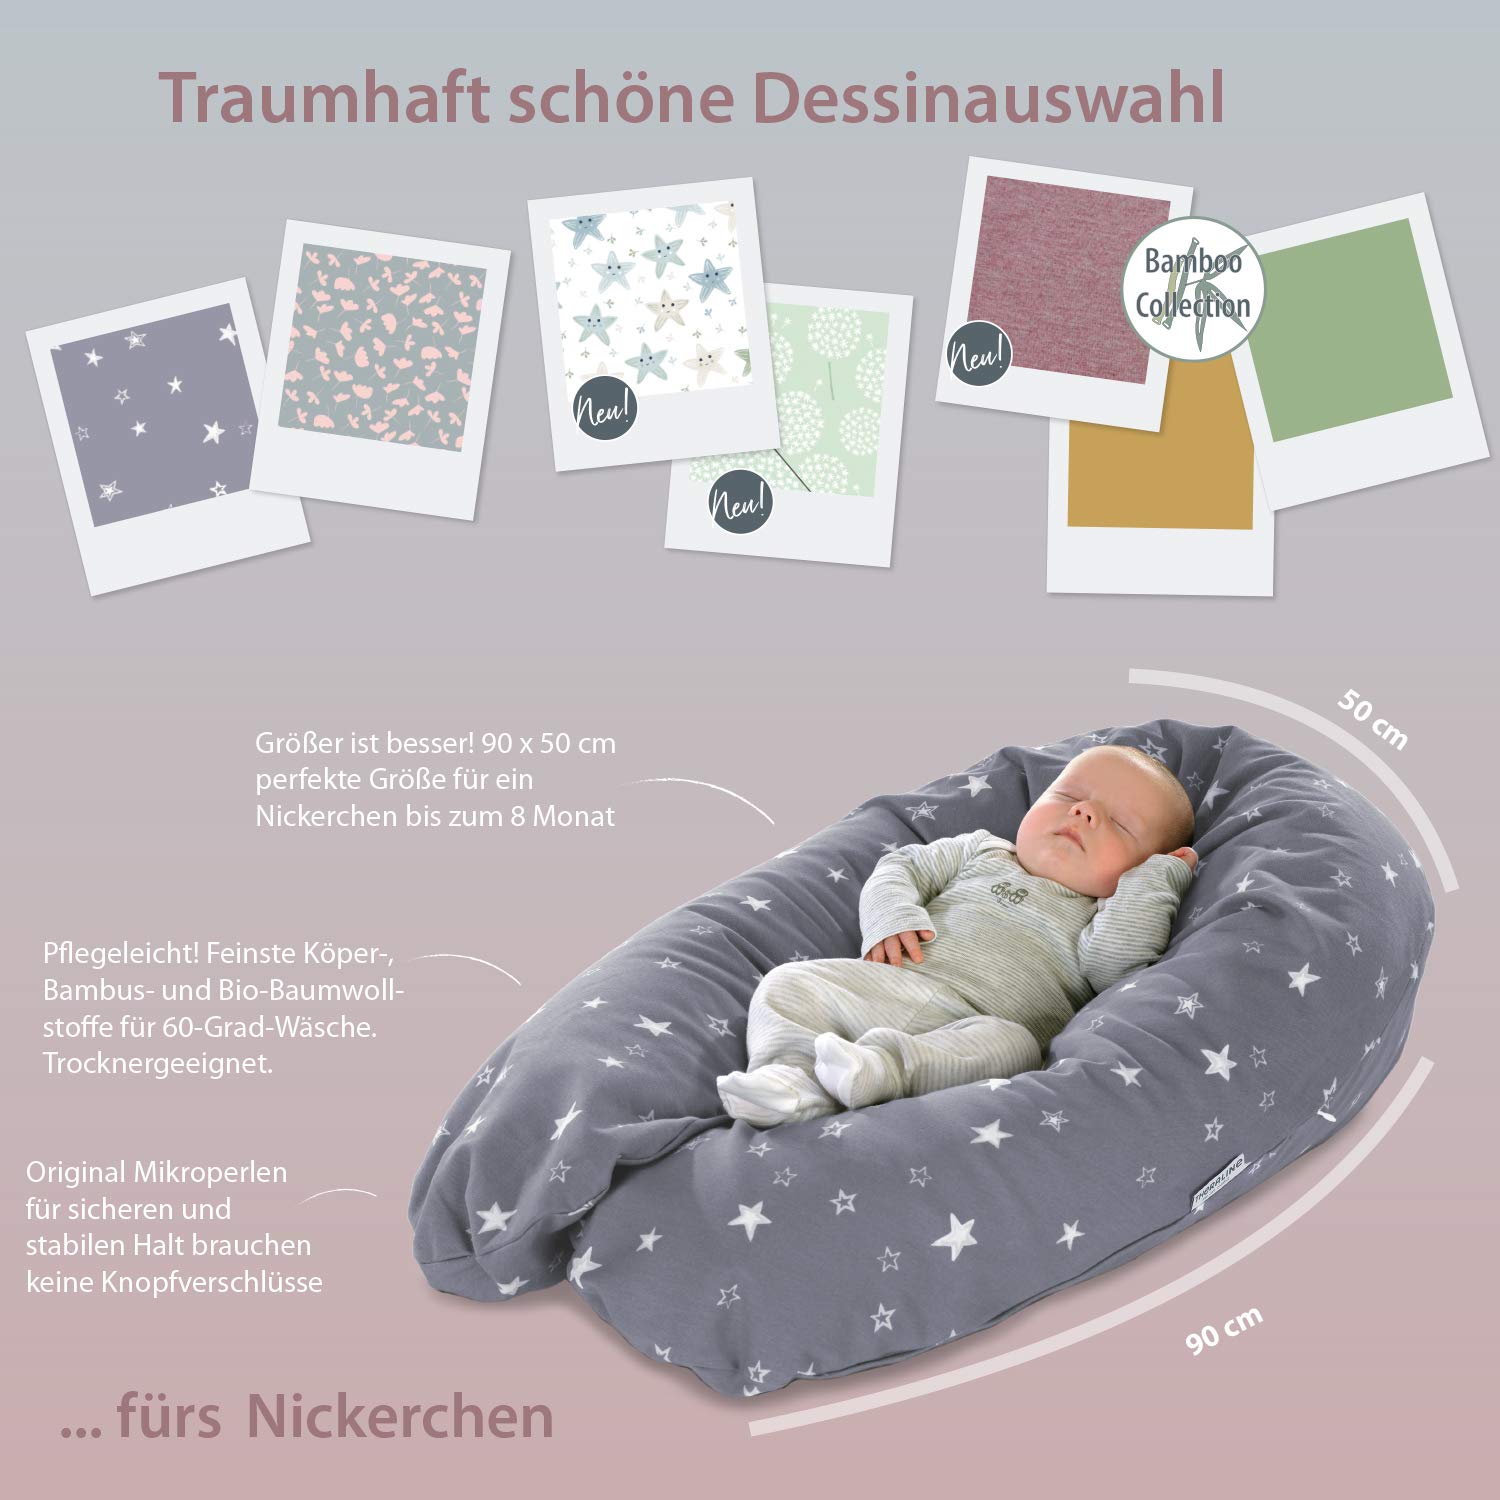 Theraline - cover for nursing pillows